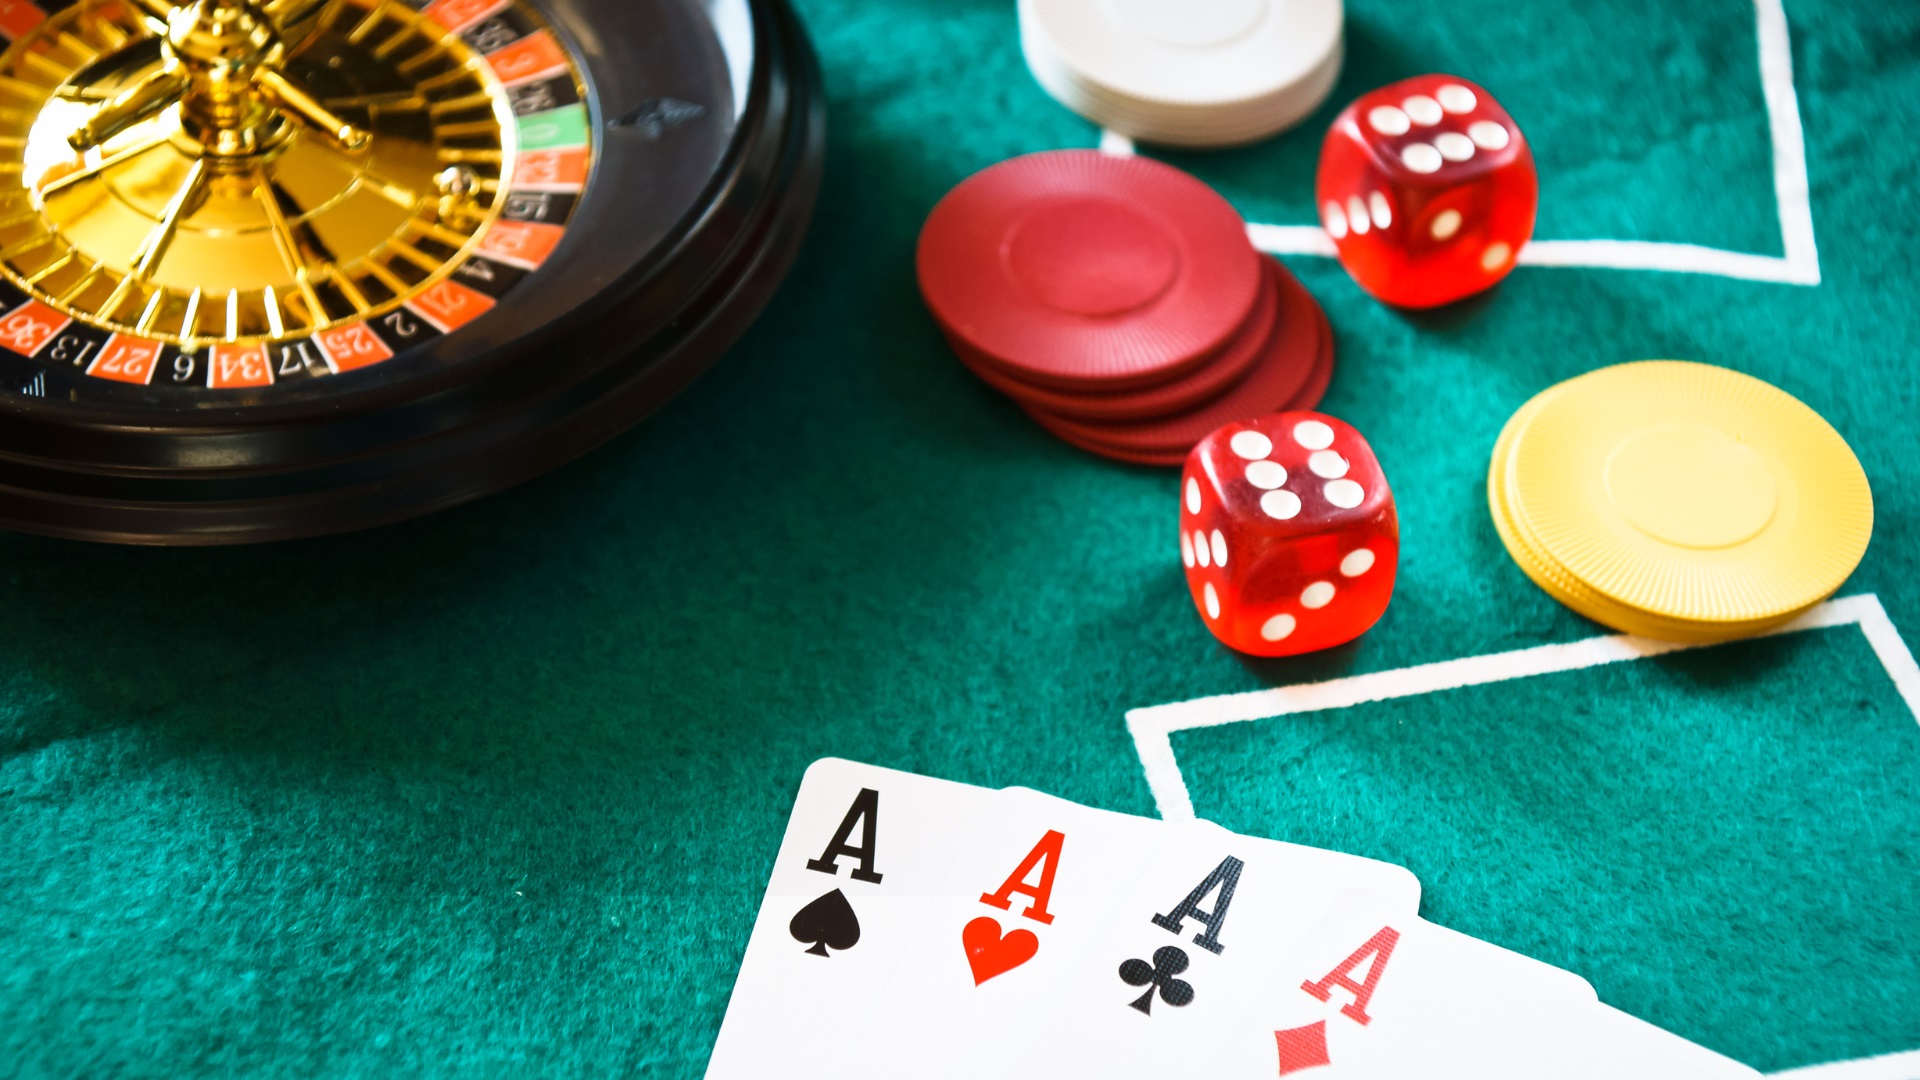 Pick Trusts Online Casino Site in Singapore to Play Game Safer